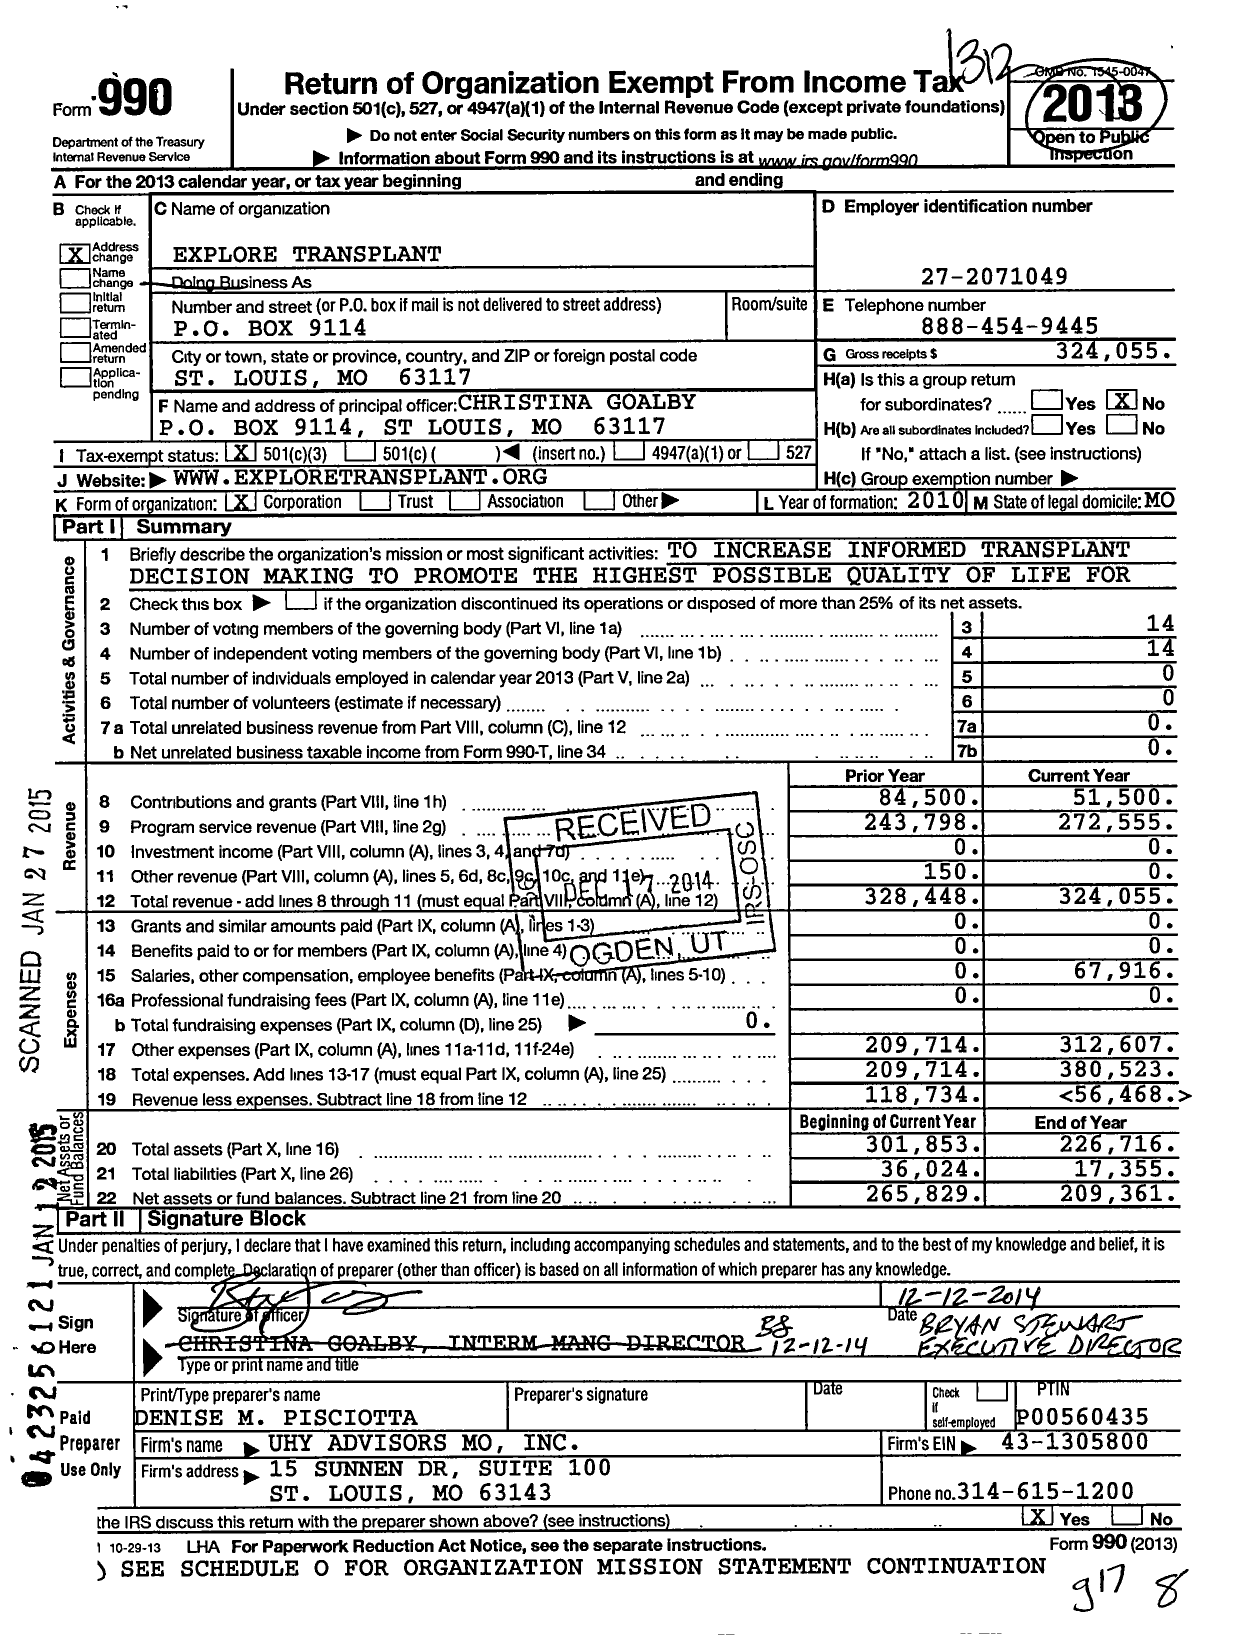 Image of first page of 2013 Form 990 for Explore Transplant